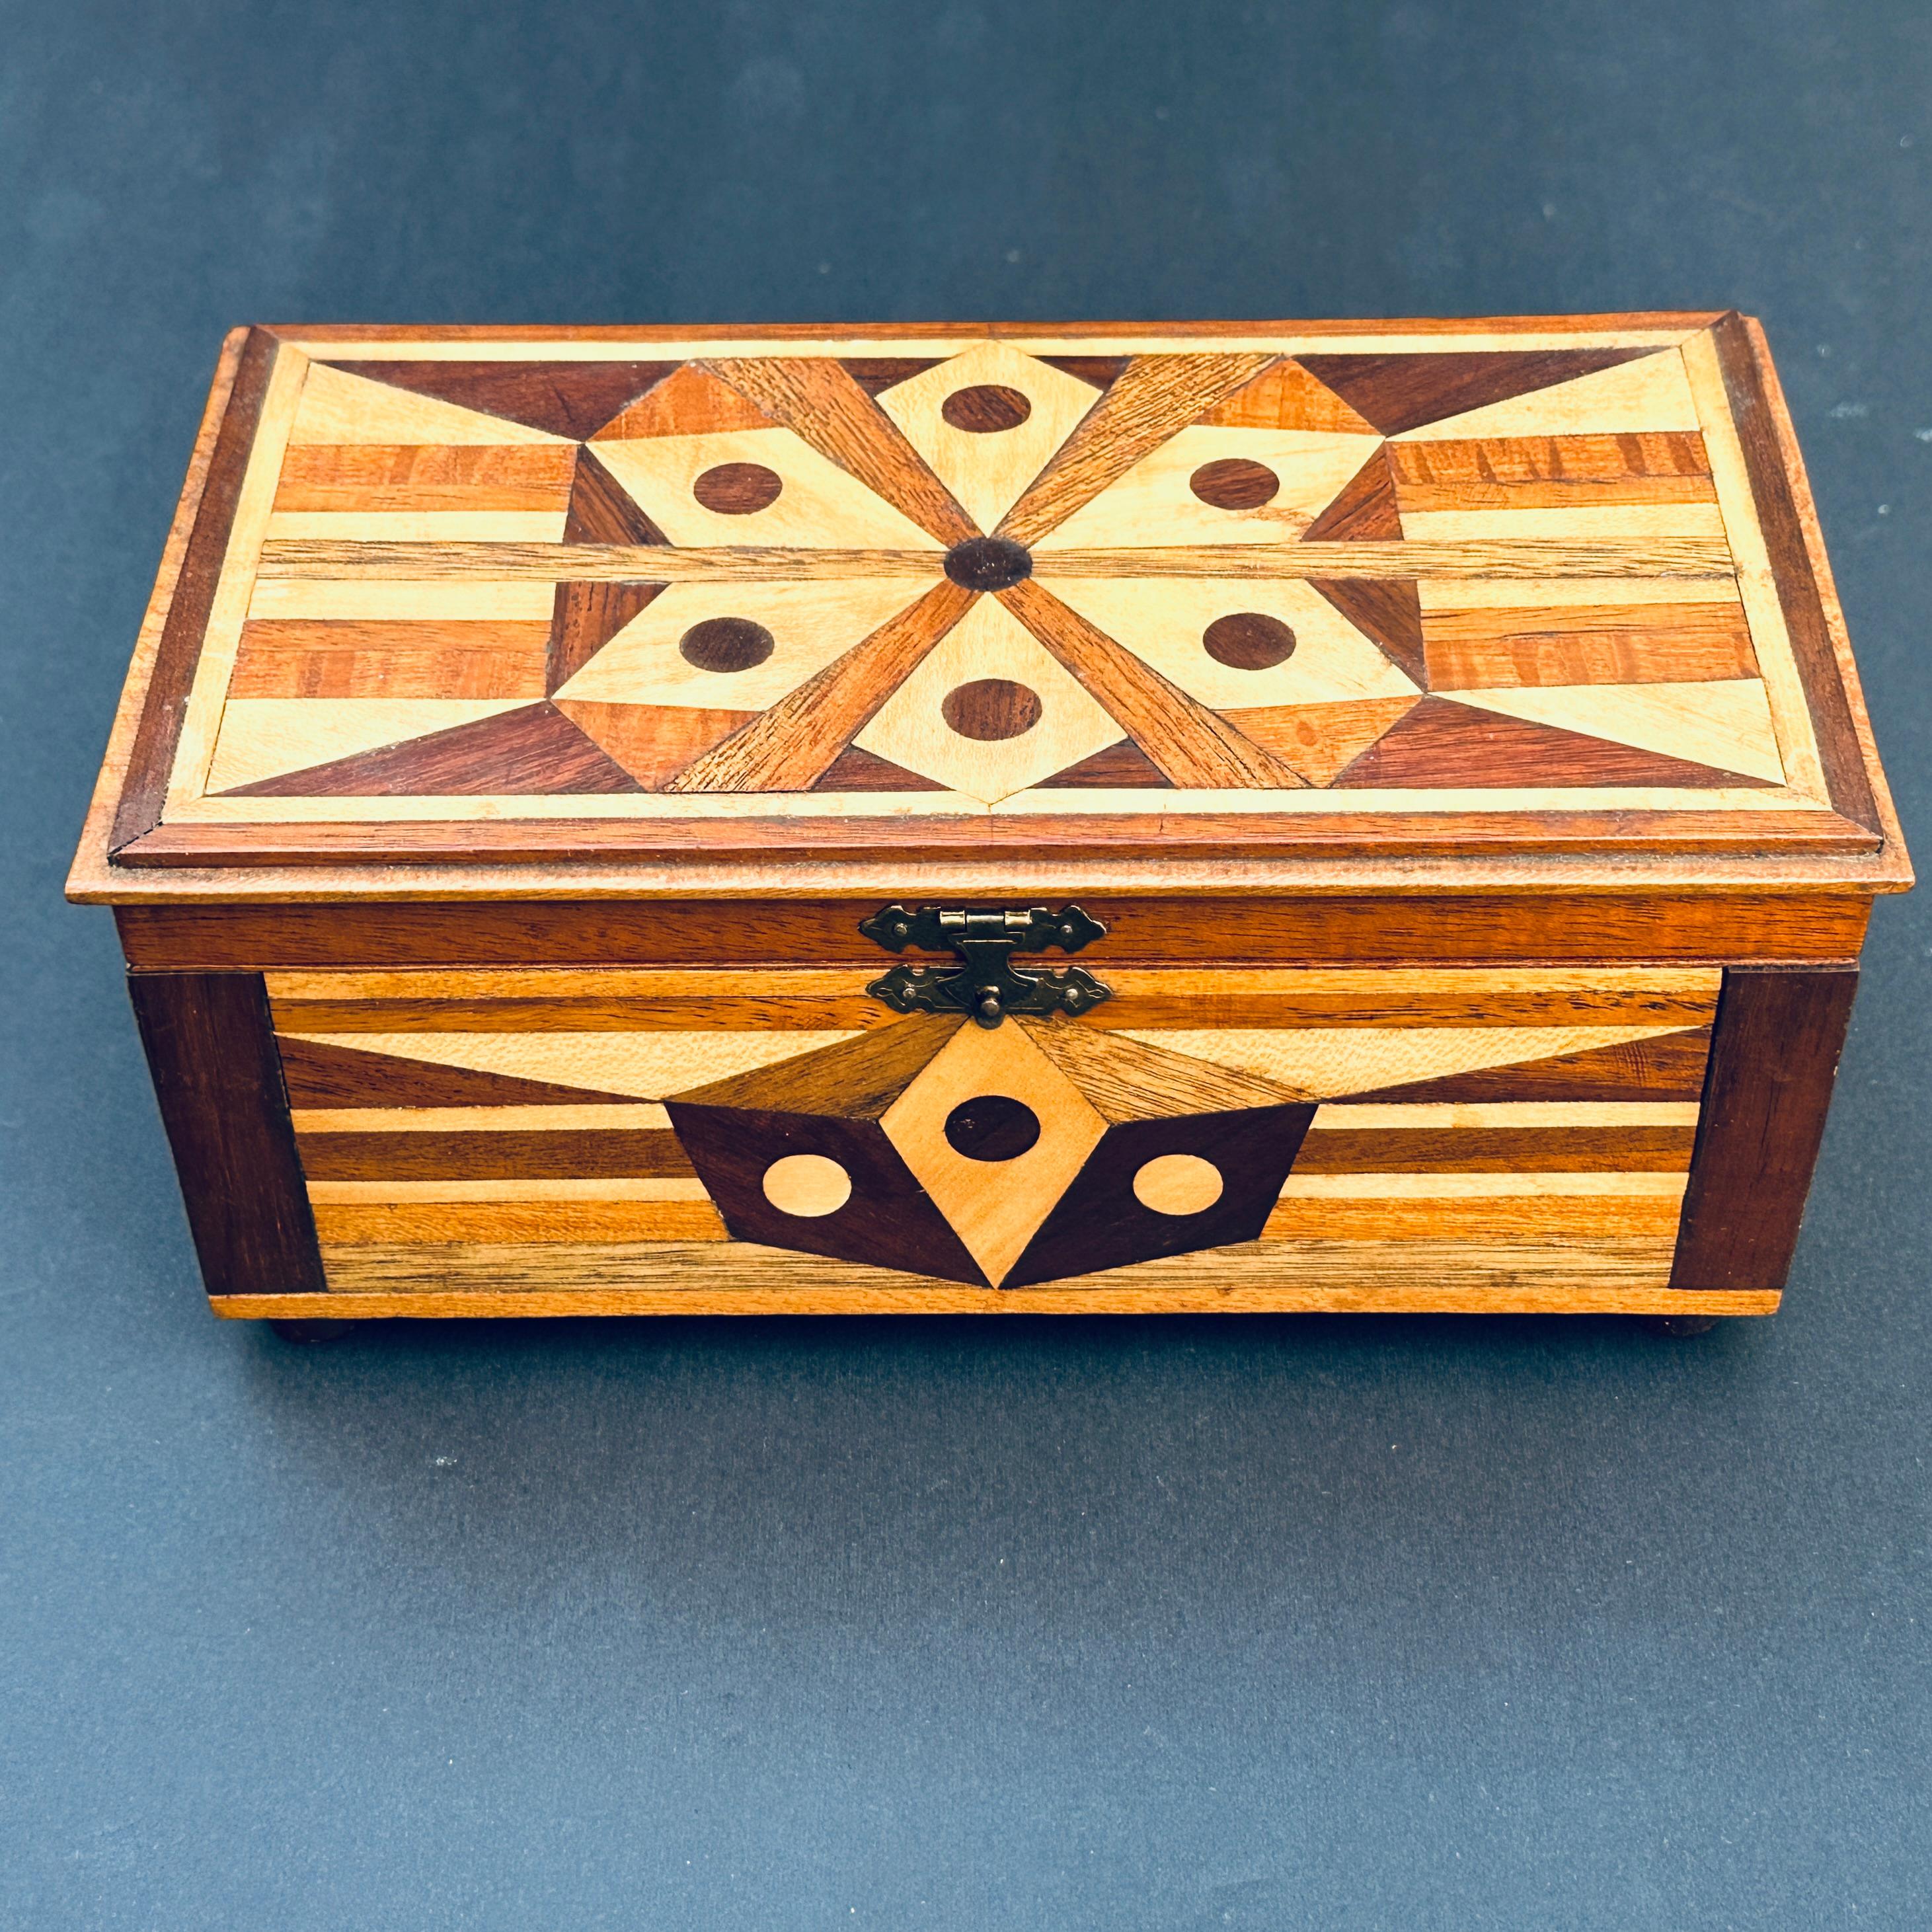 Hand made geometric inlaid wooden hinged xox with red enameled interior.